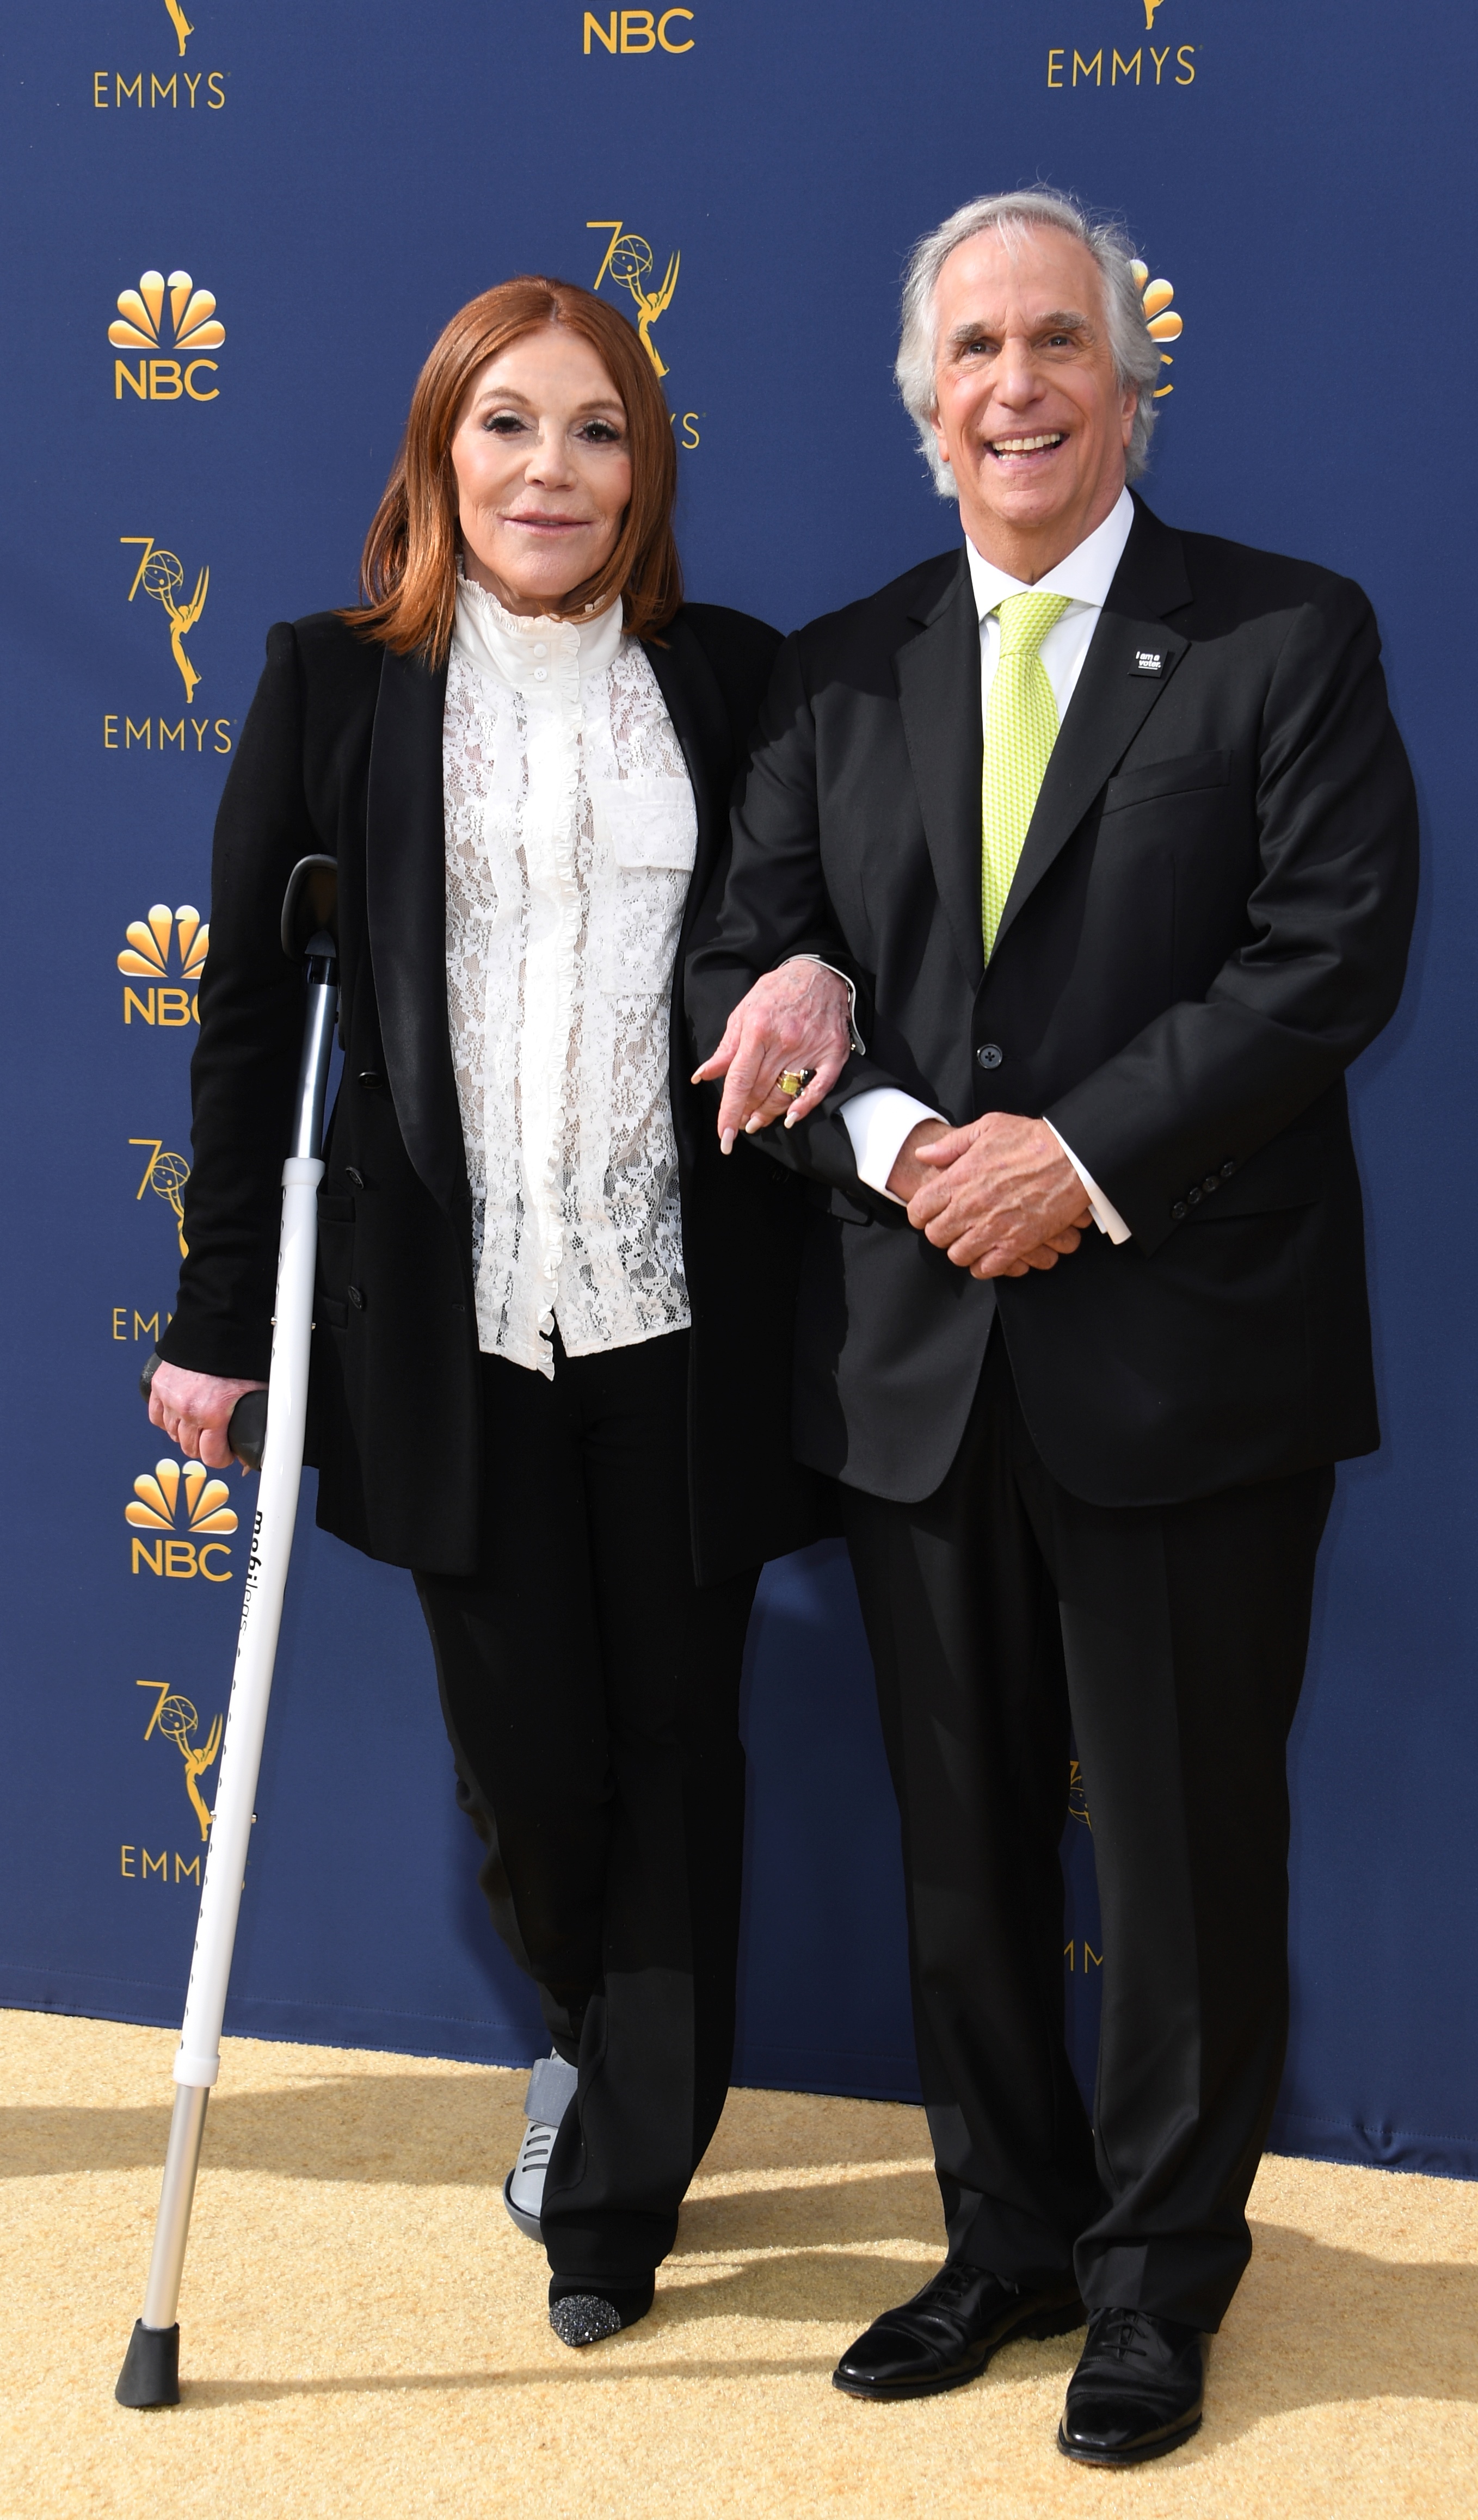 Henry Winkler and Stacey Weitzman at the 70th Emmy Awards in Los Angeles, California on September 17, 2018 | Source: Getty Images